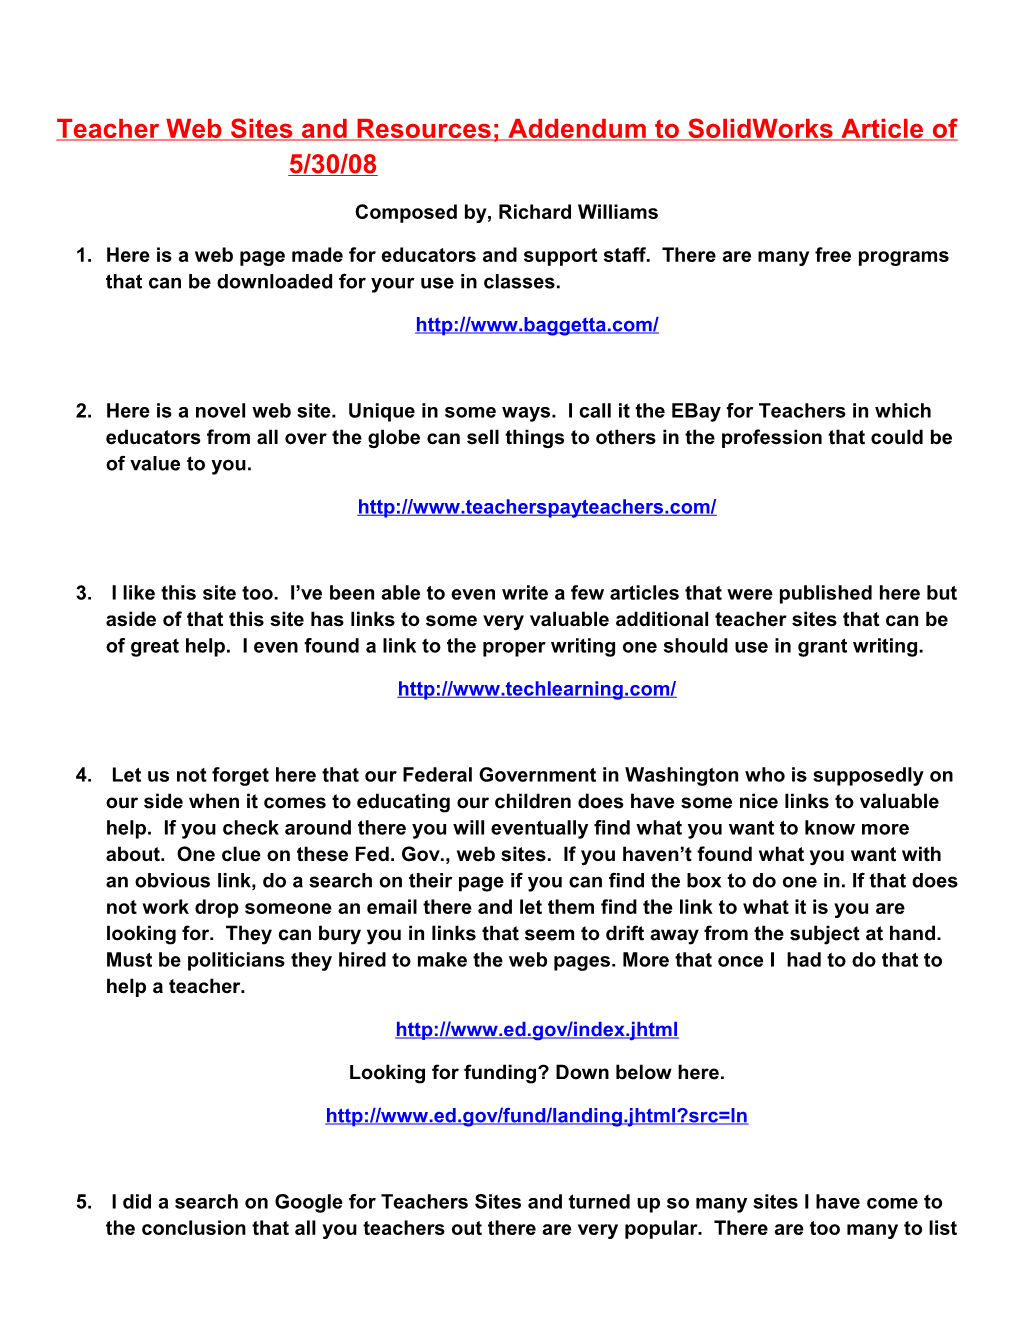 Teacher Web Sites and Resources; Addendum to Solidworks Article of 5/30/08